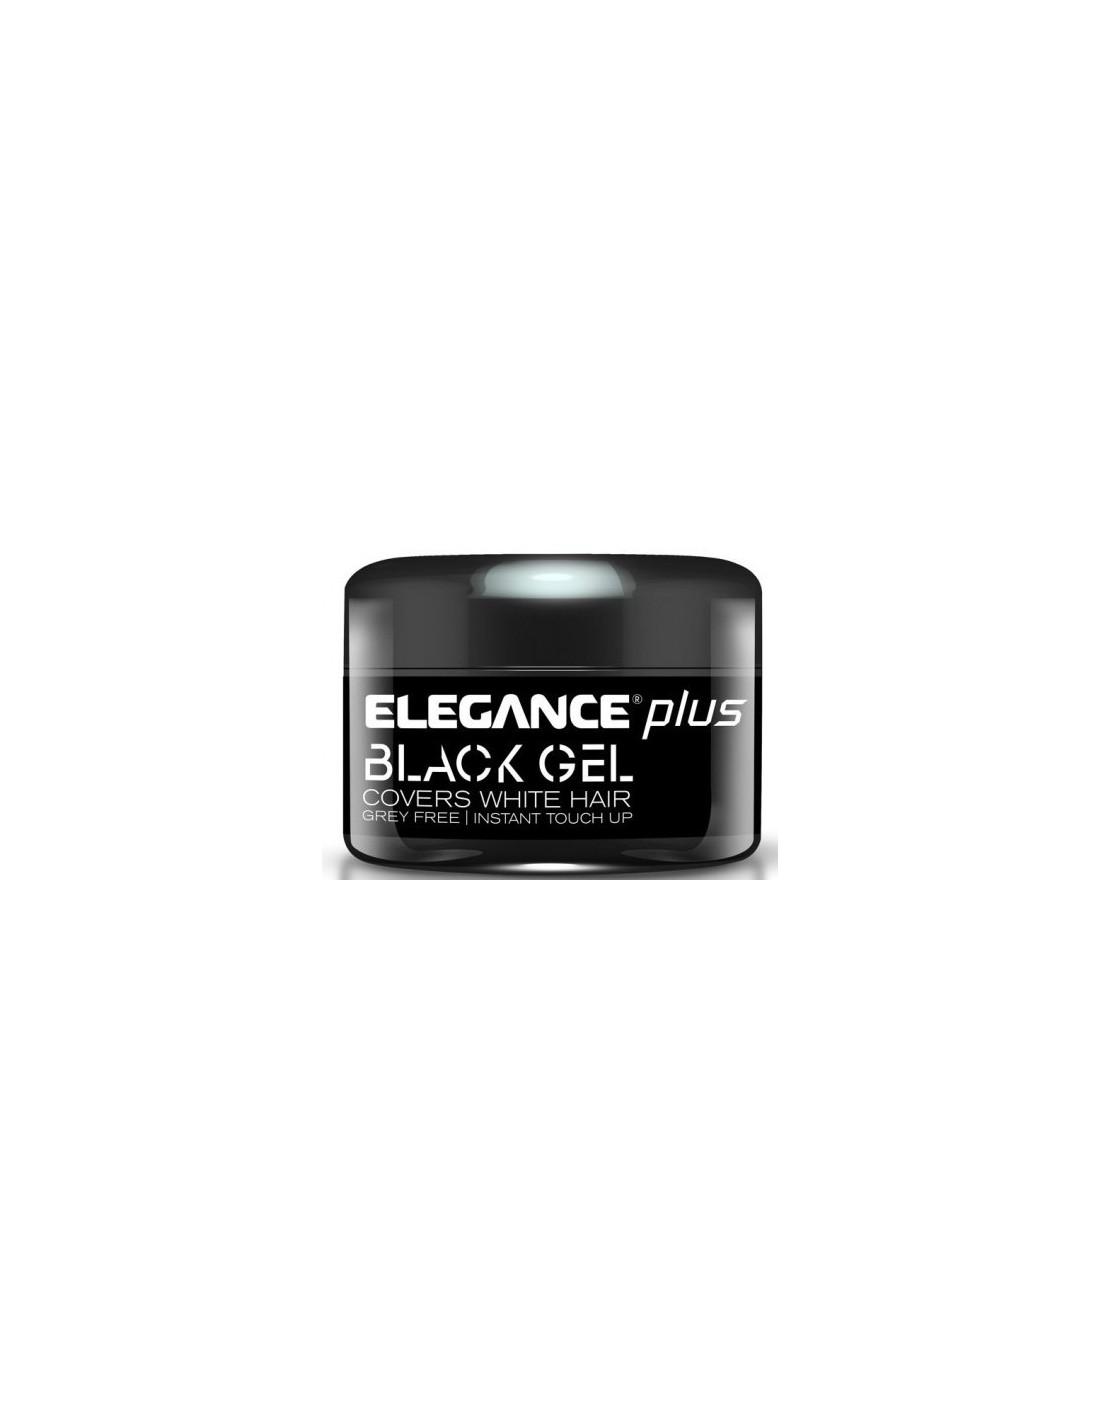 Elegance Plus Black Gel, a wax finish black color to cover gray hair